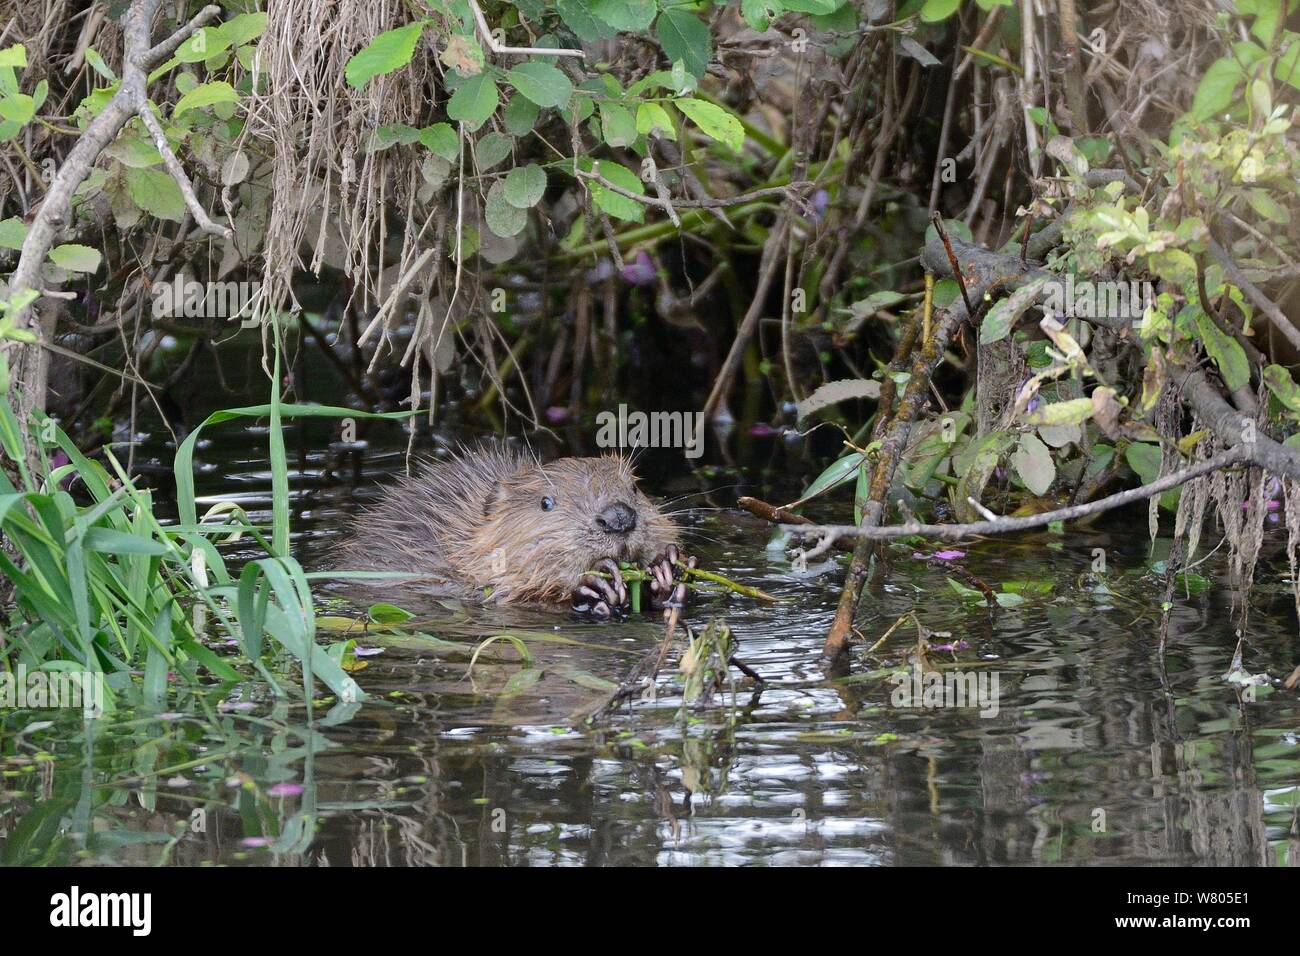 Eurasian beaver (Castor fiber) kit feeding on Willow (Salix), born in the wild on the River Otter, part of a release project managed by the Devon Wildlife Trust, Devon, England, UK, August 2015. Stock Photo